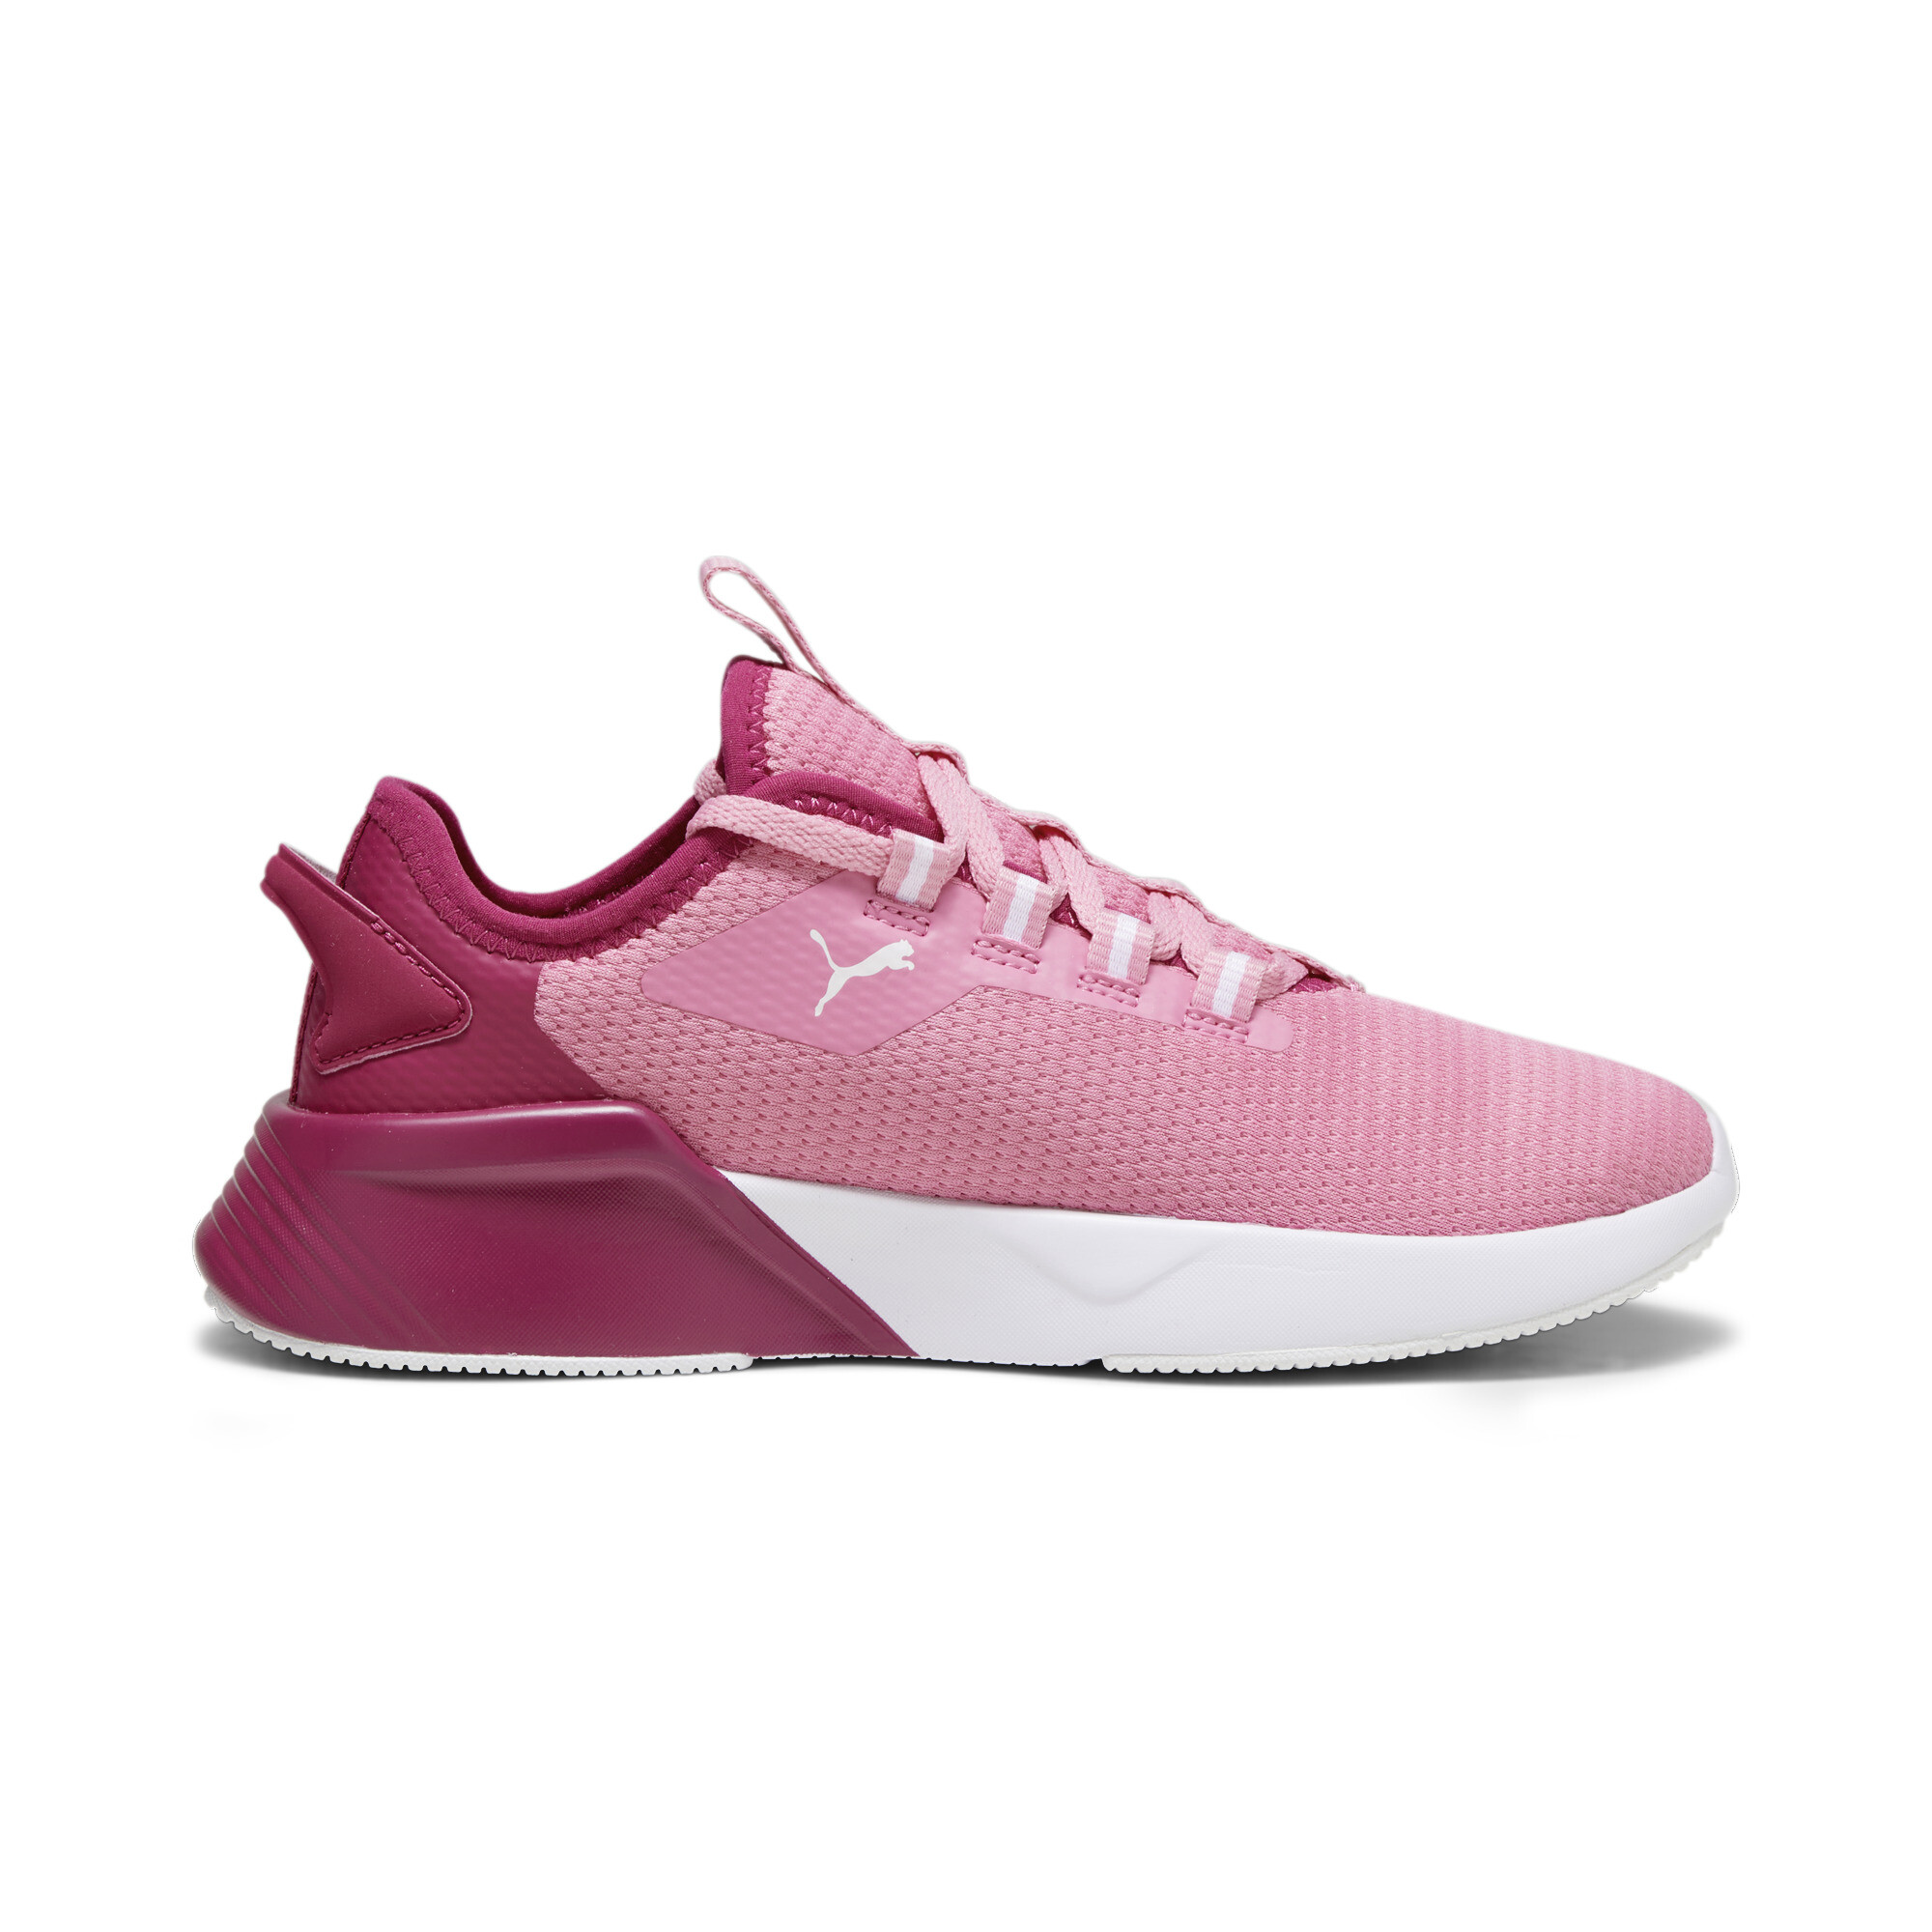 Puma Retaliate 2 Sneakers Youth, Pink, Size 35.5, Shoes